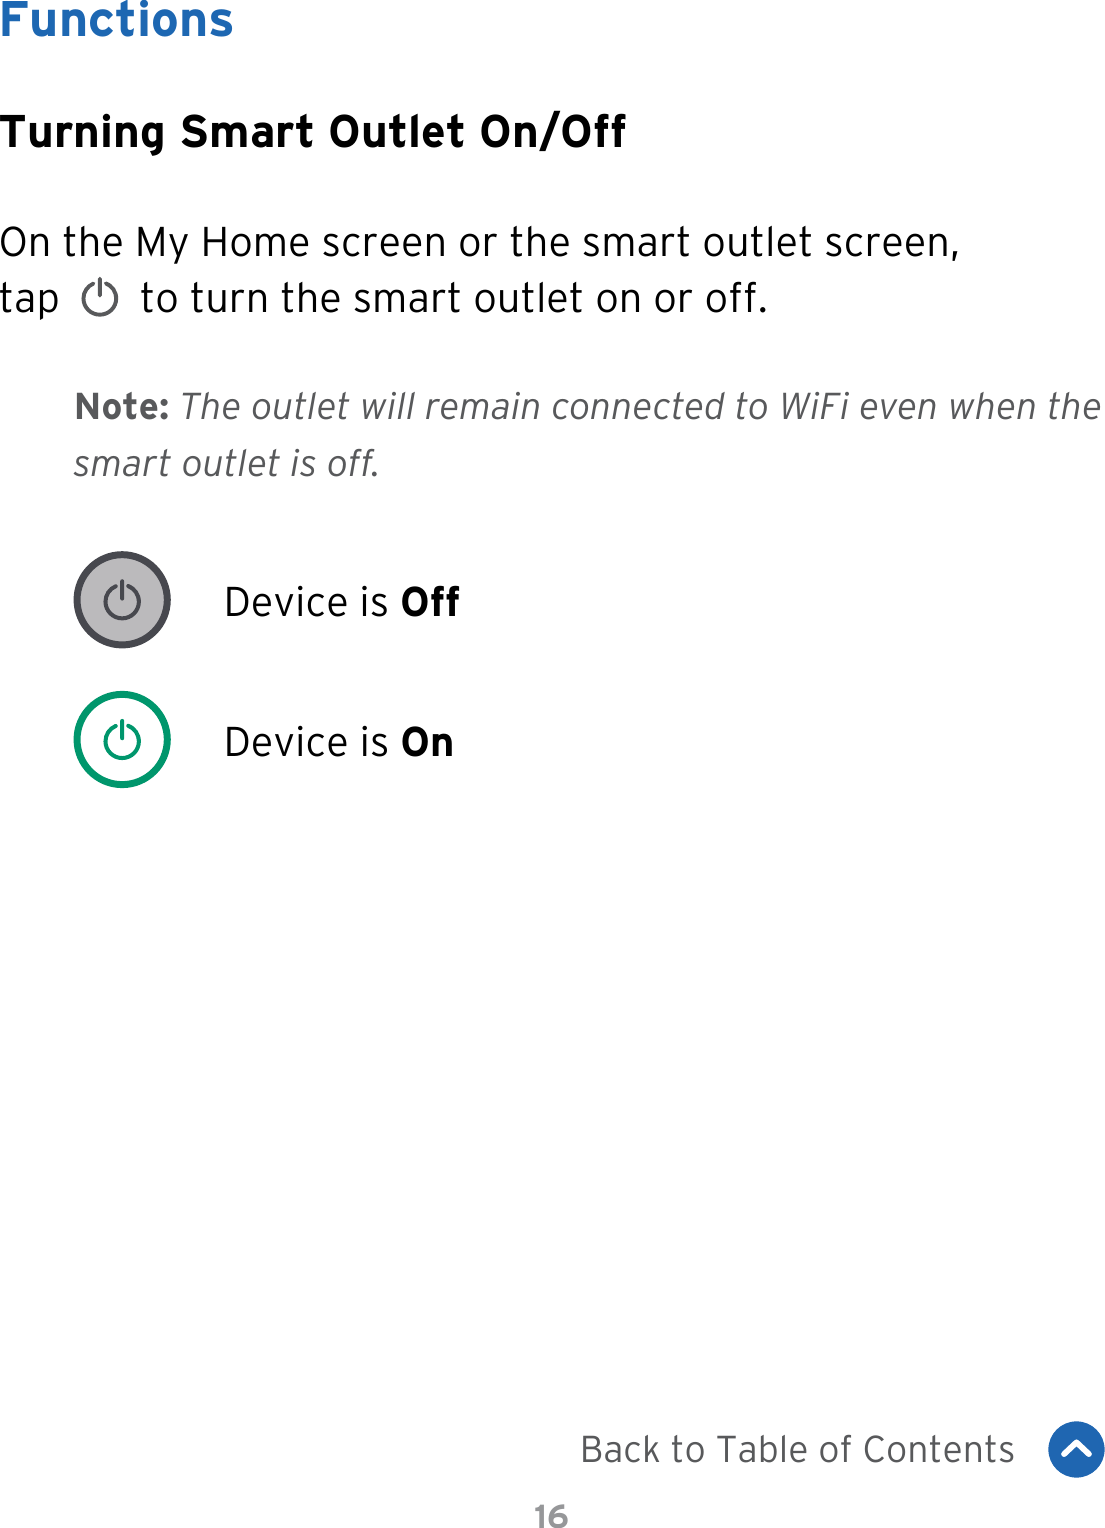 16FunctionsTurning Smart Outlet On/OffOn the My Home screen or the smart outlet screen,  tap     to turn the smart outlet on or off.Device is OffDevice is OnNote: The outlet will remain connected to WiFi even when the smart outlet is off.Back to Table of Contents